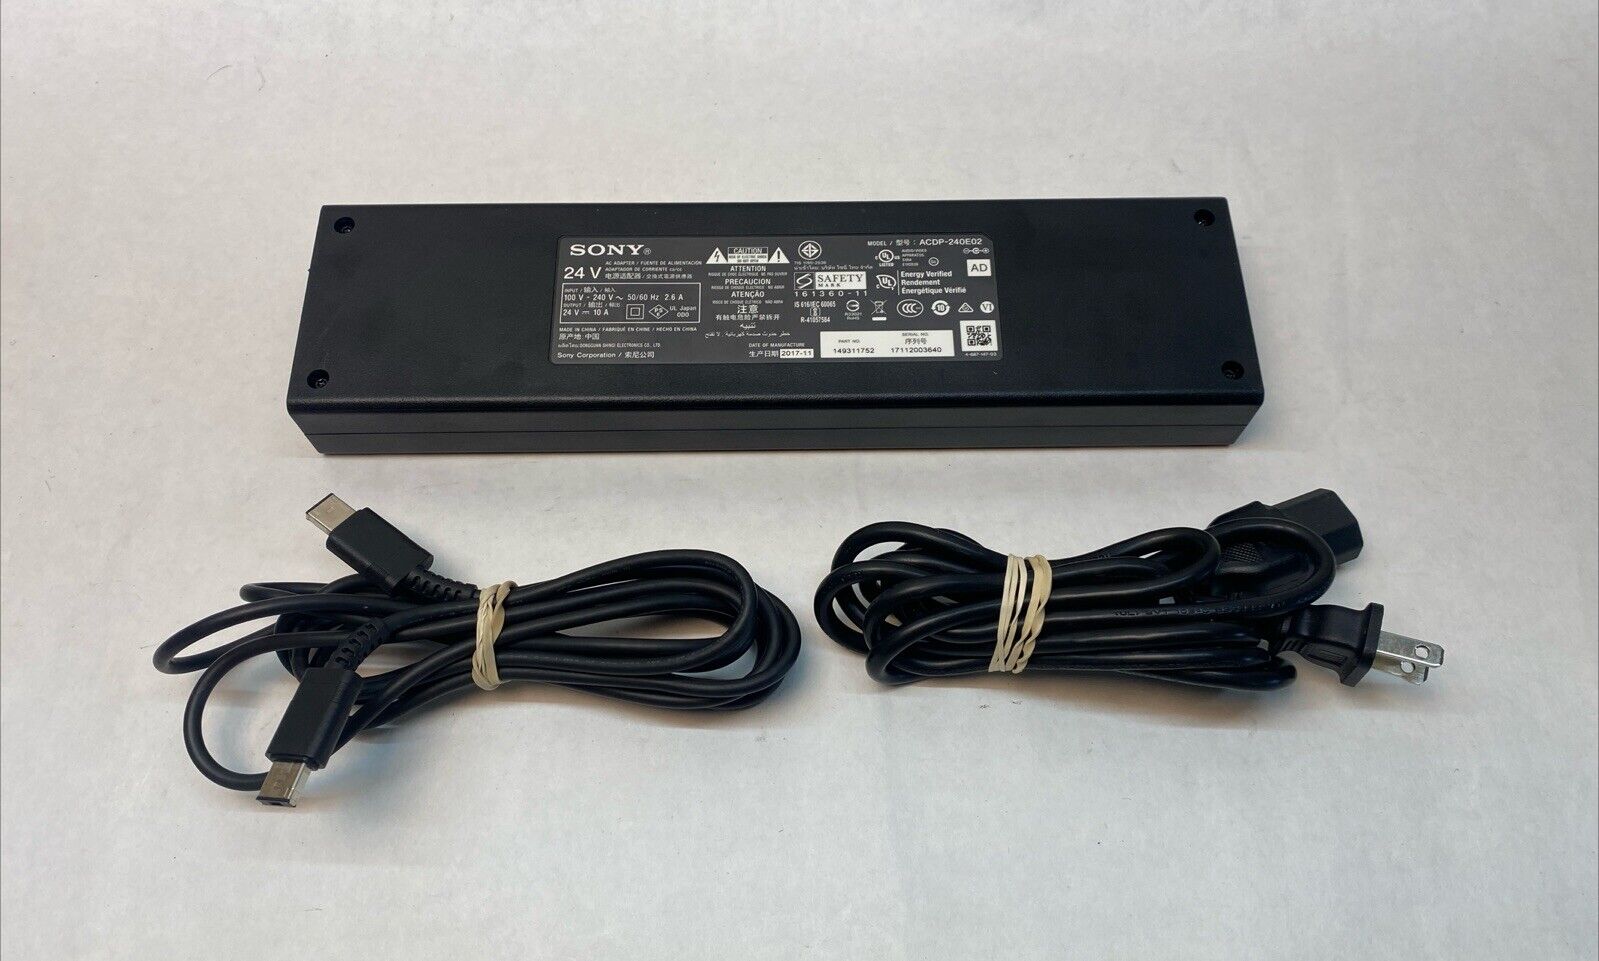 24V 10A Genuine Sony ACDP-240E02 AC Adapter Charger for Sony TV LED Monitor OEM